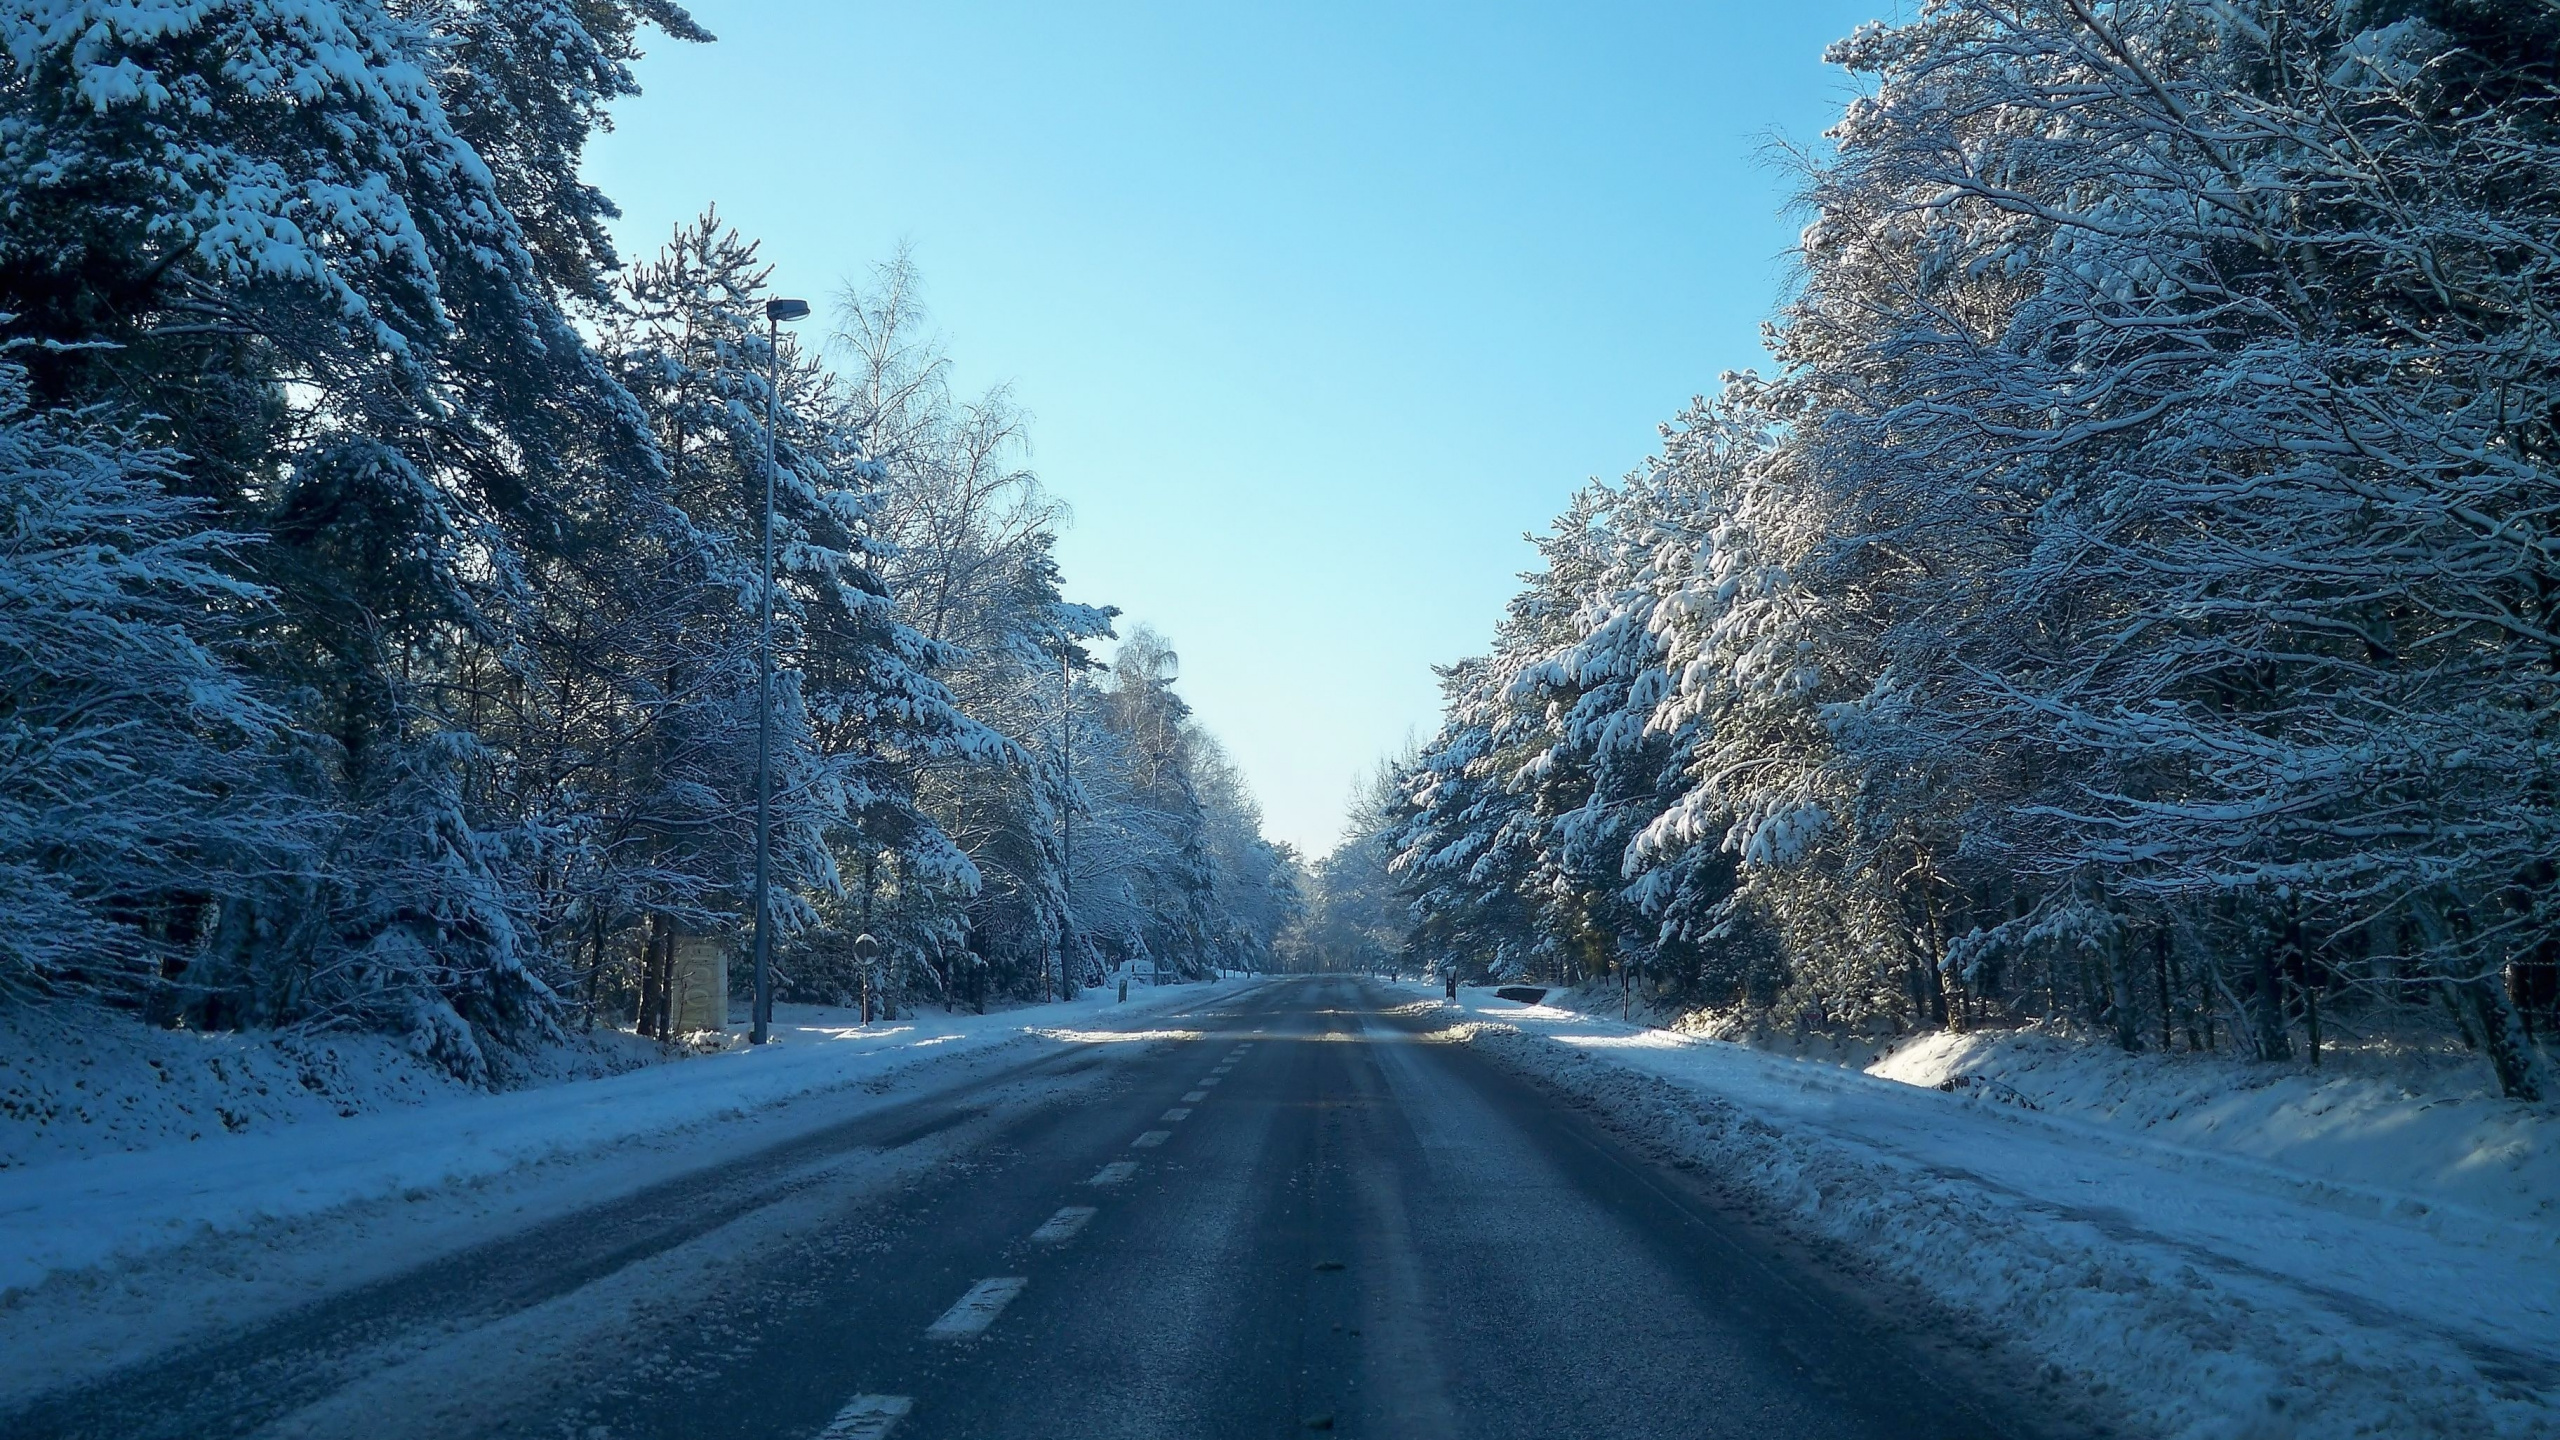 Snow Covered Road Between Trees During Daytime. Wallpaper in 2560x1440 Resolution